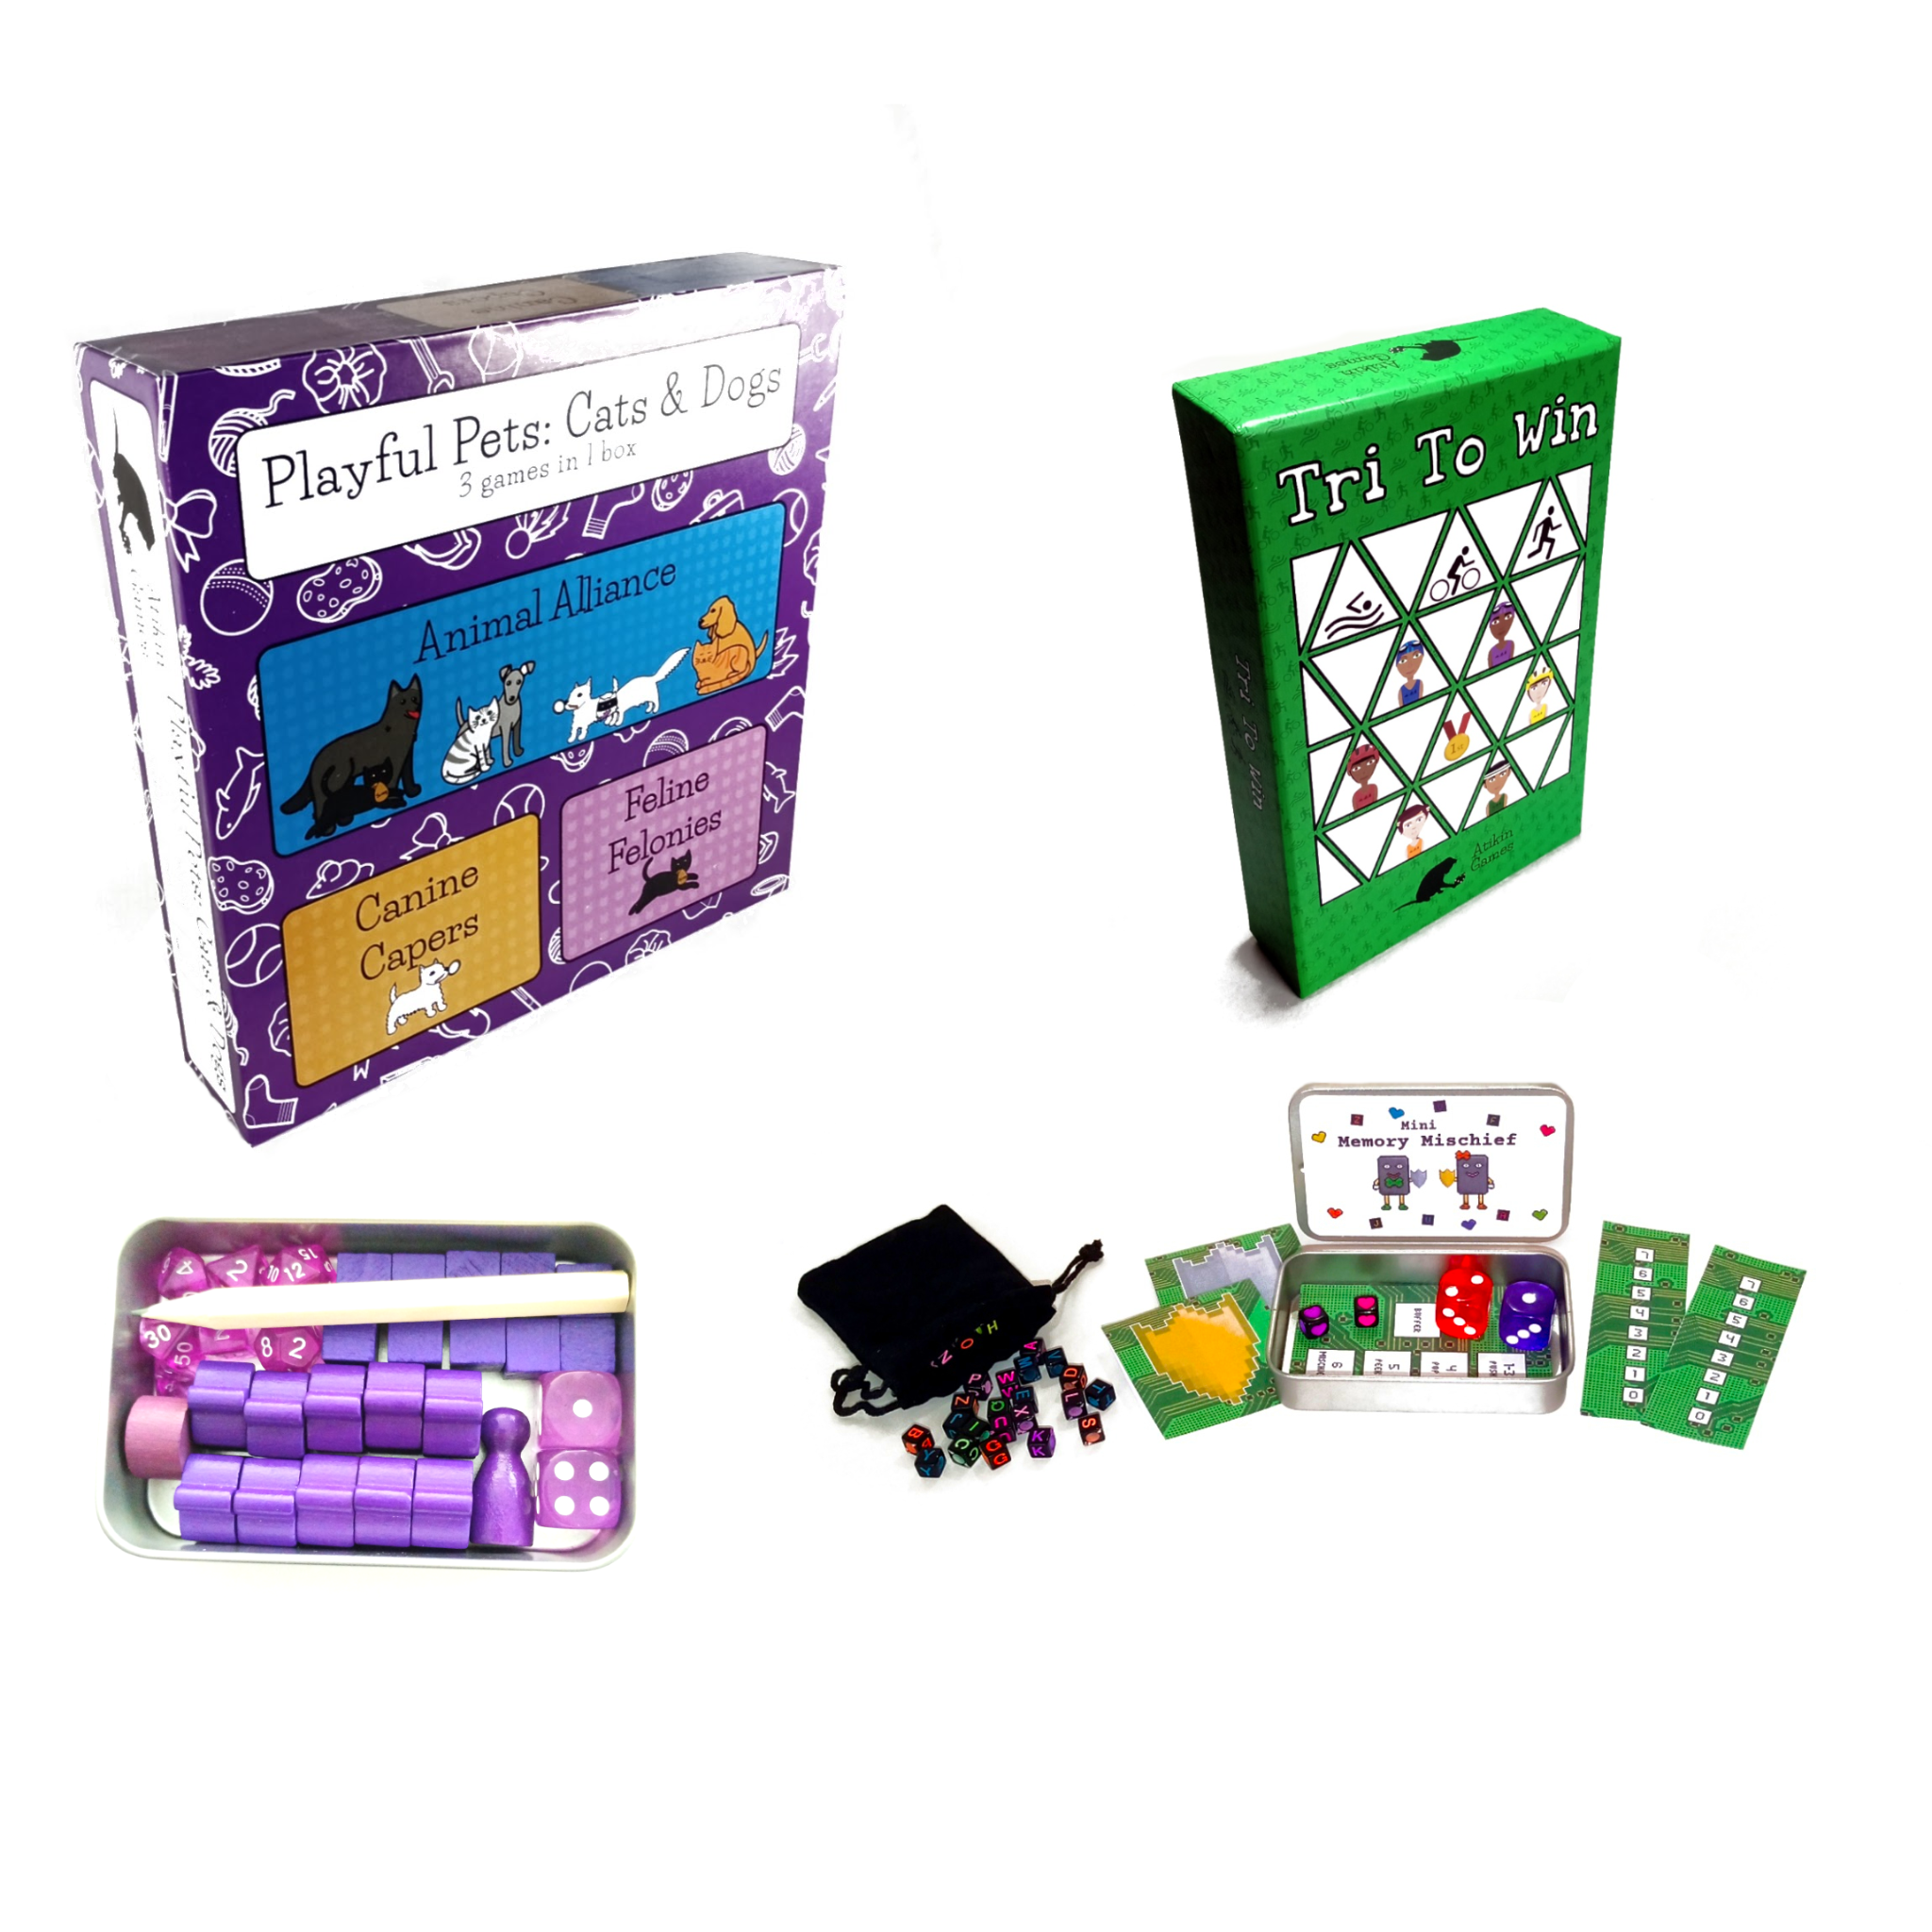 The Board Game Survival Kit by Atikin Games - Extra Meeple - Gamefound